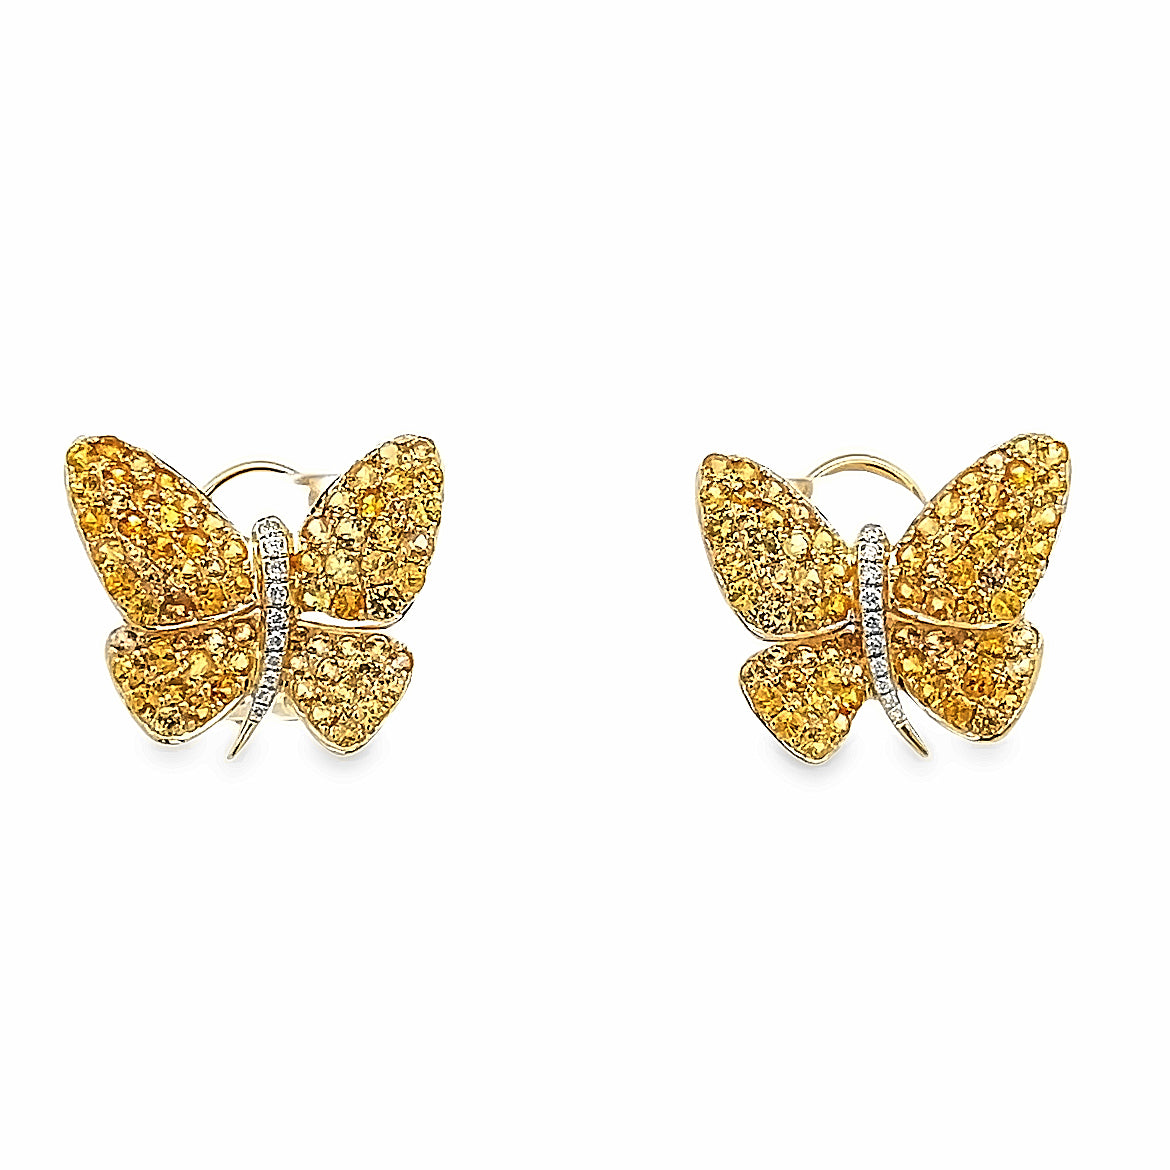 18K GOLD BUTTERFLY EARRINGS WITH YELLOW SAPPHIRE